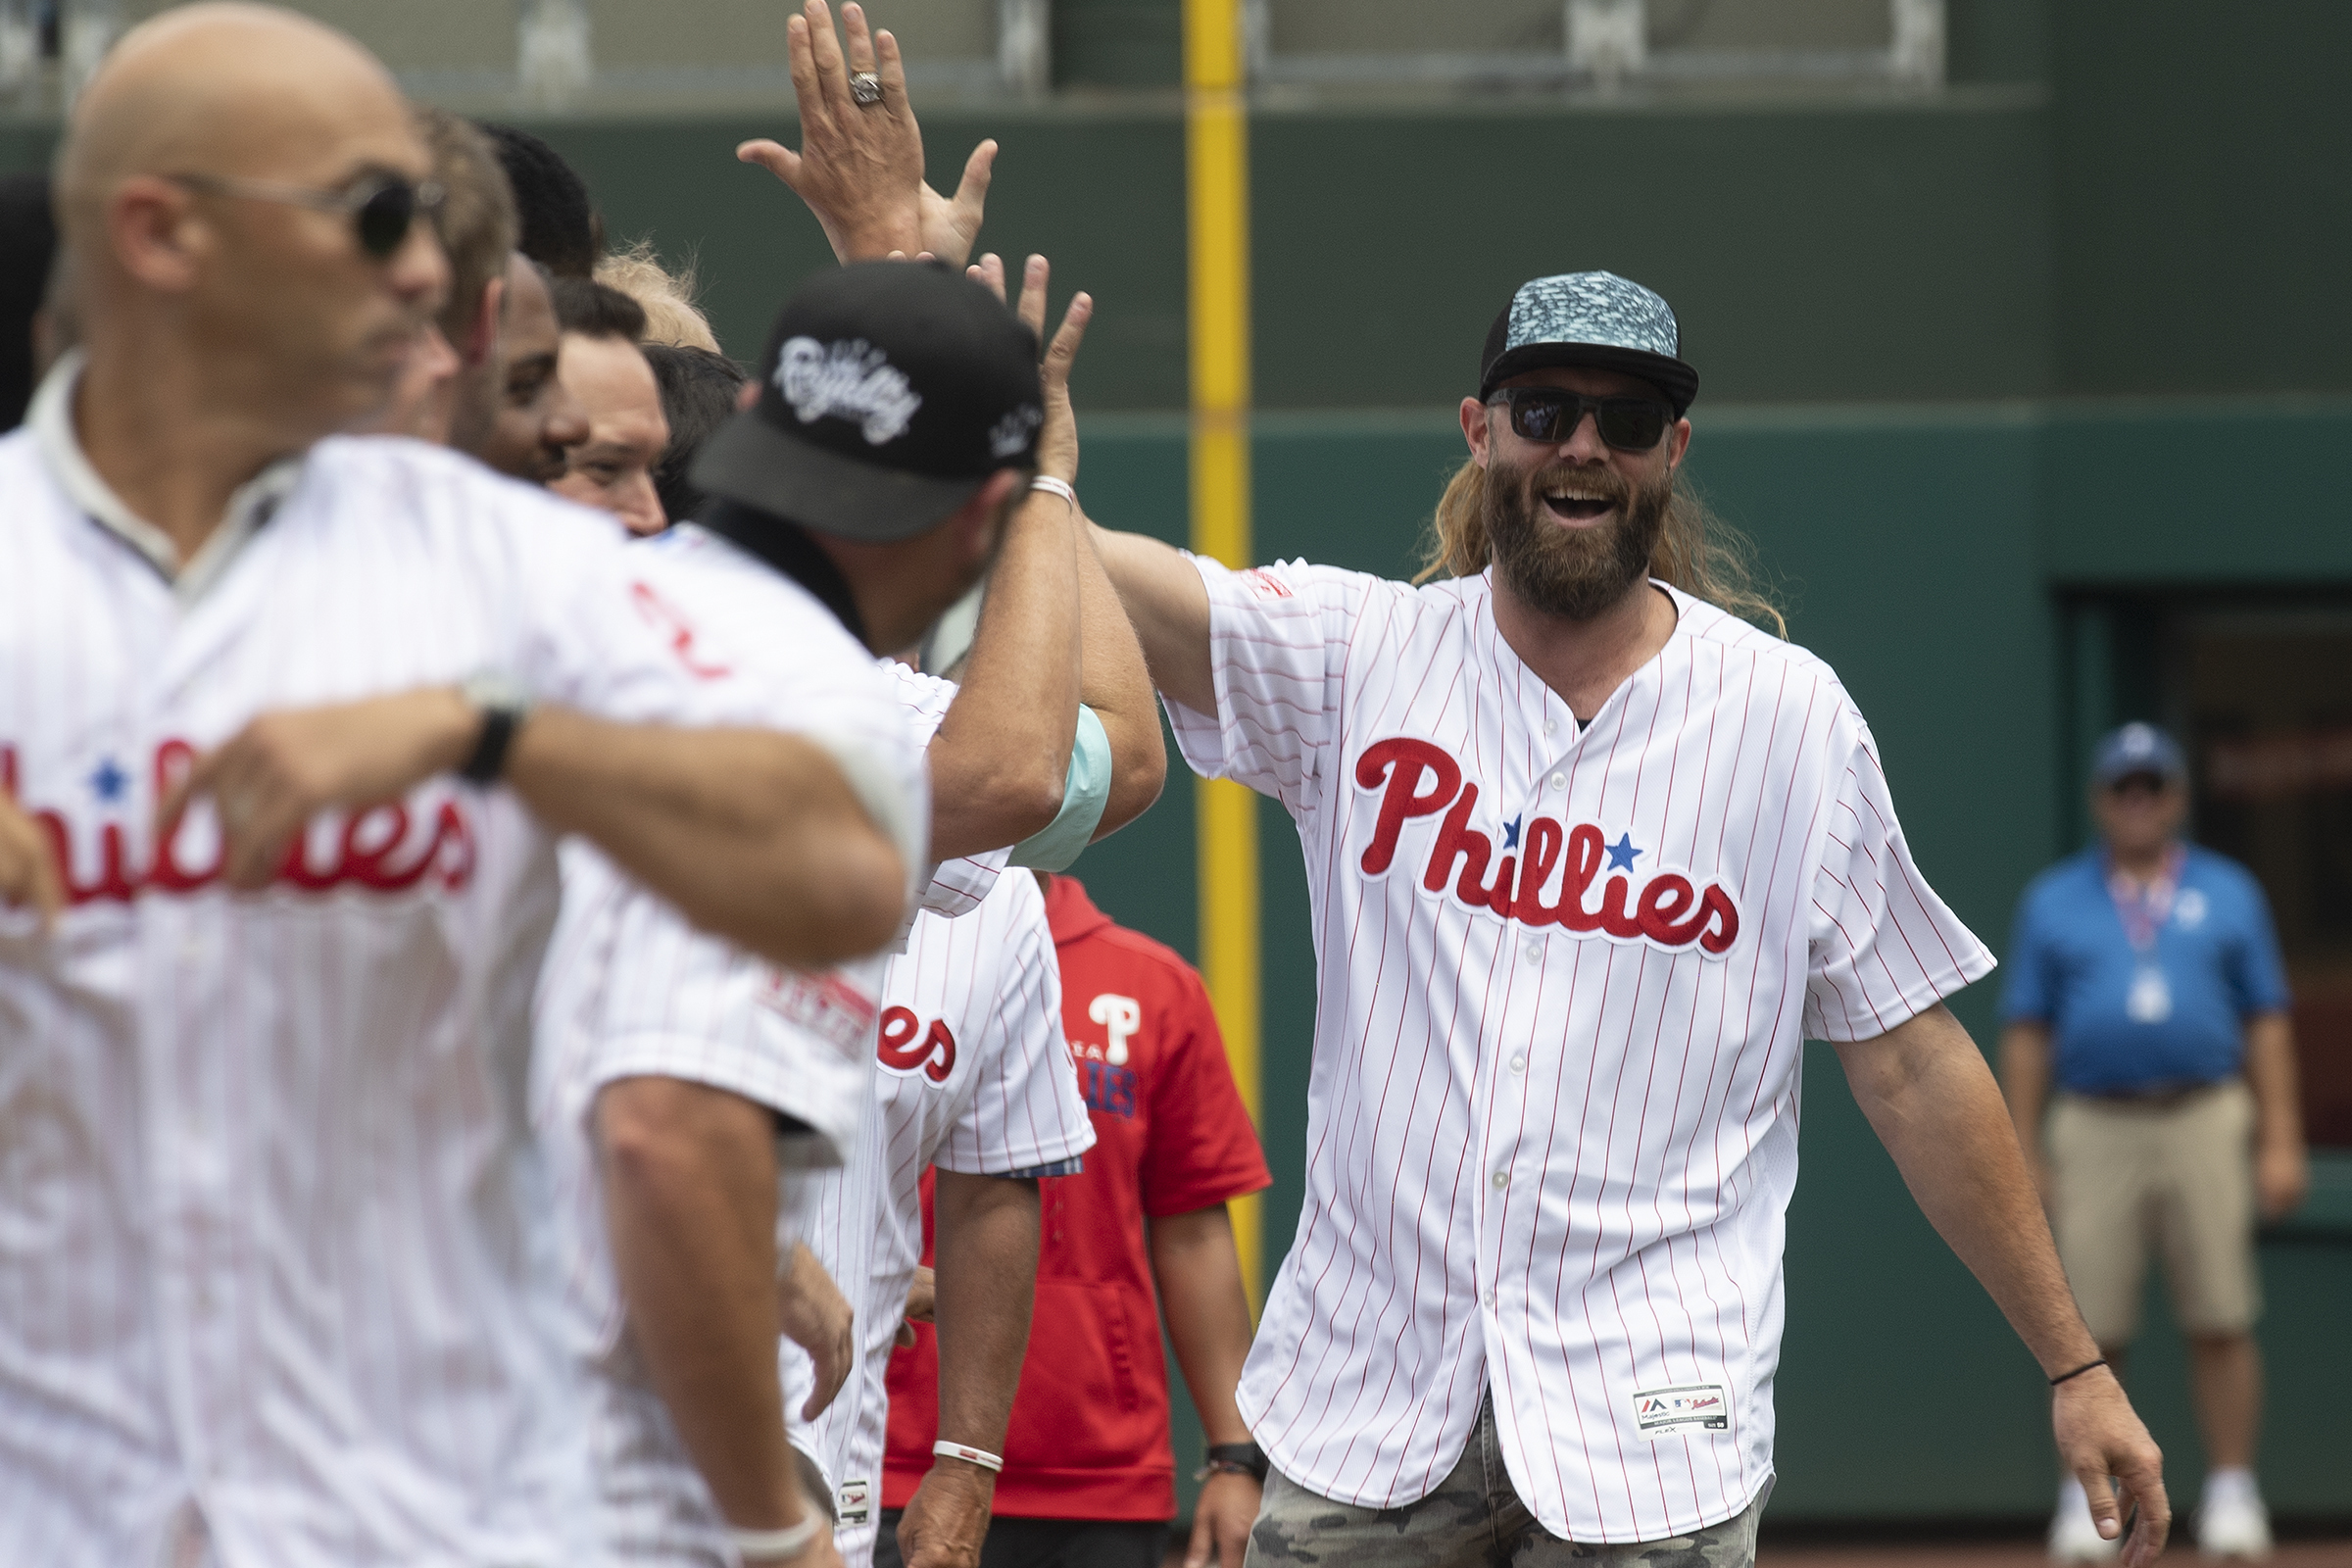 NLCS: Former Phillie Jayson Werth to throw out first pitch at Game